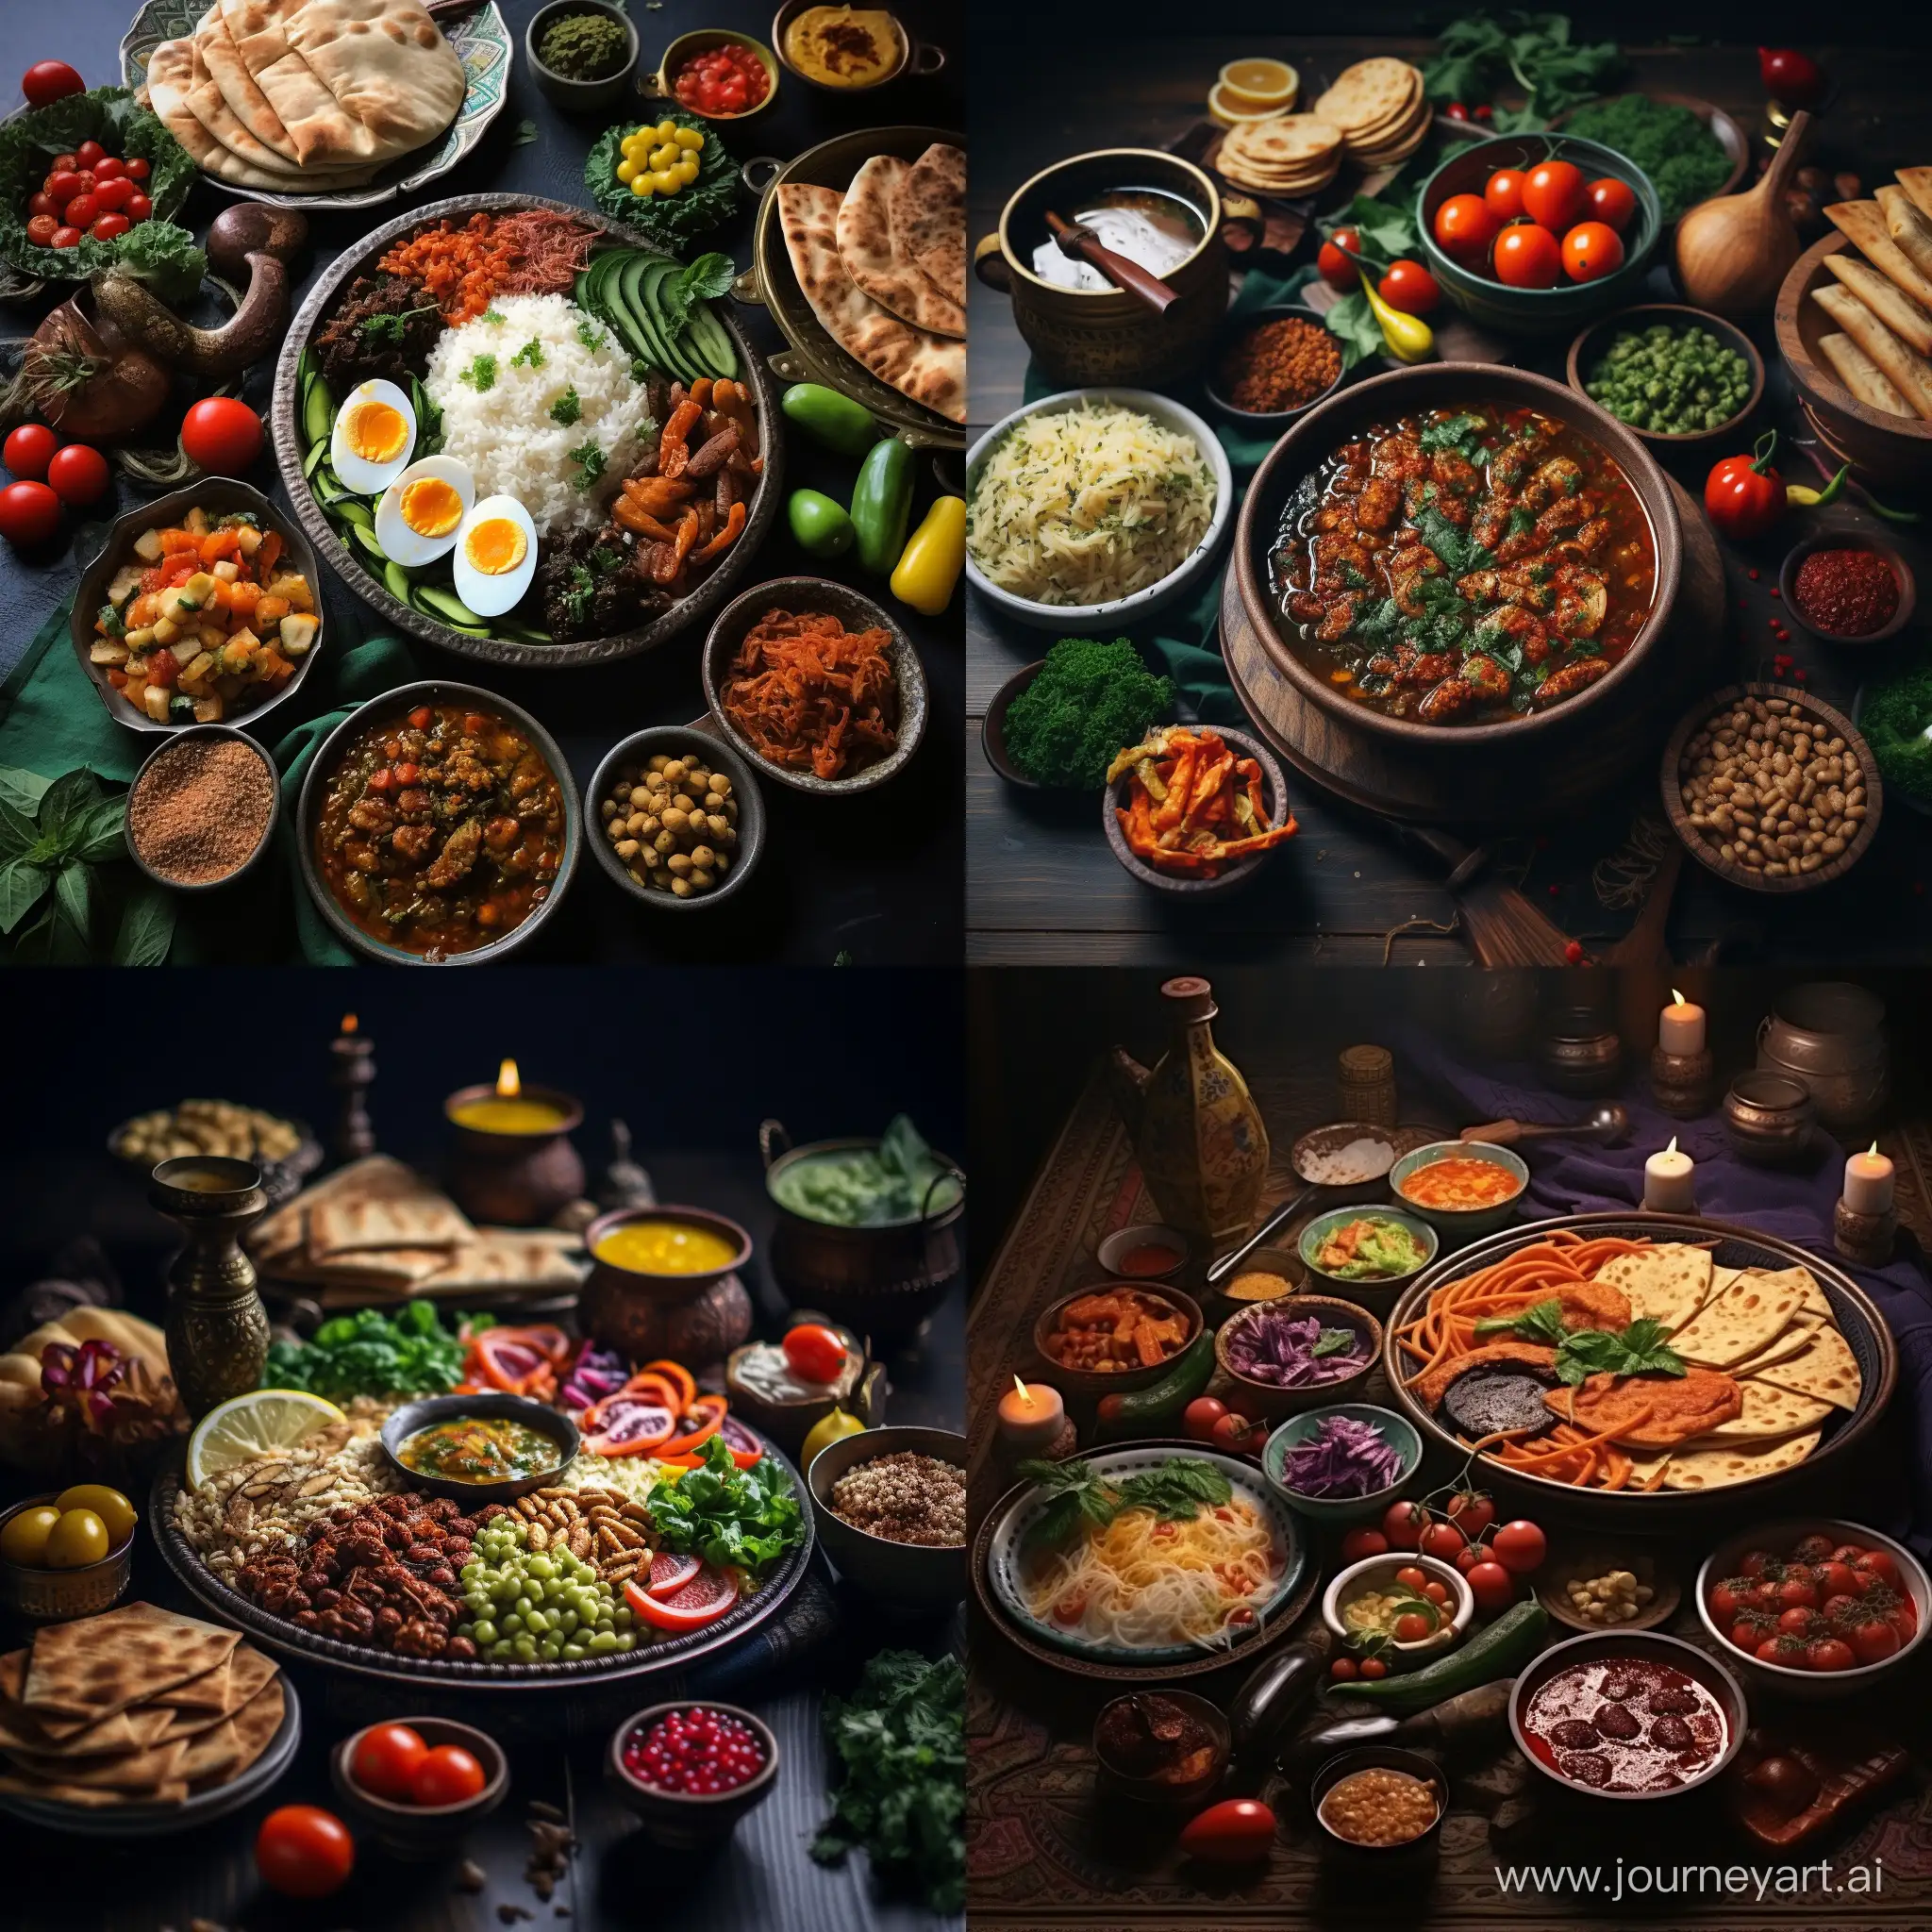 Delicious-Turkish-Food-Platter-with-Artistic-Presentation